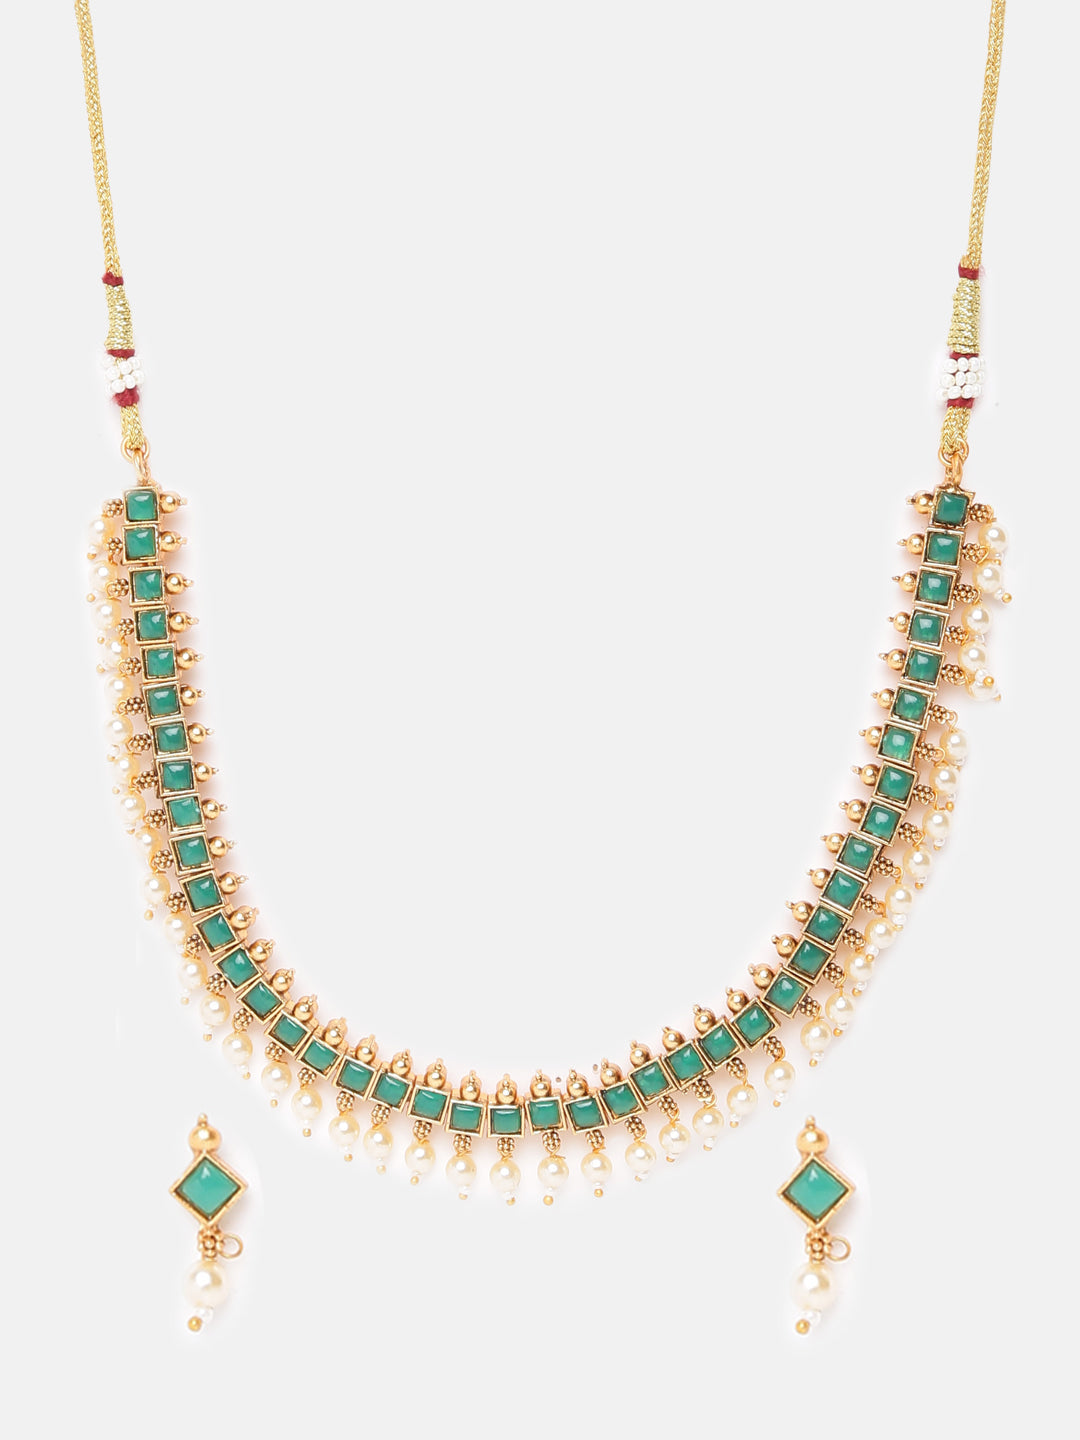 Green Cz stone Simple Necklace 4981N-1